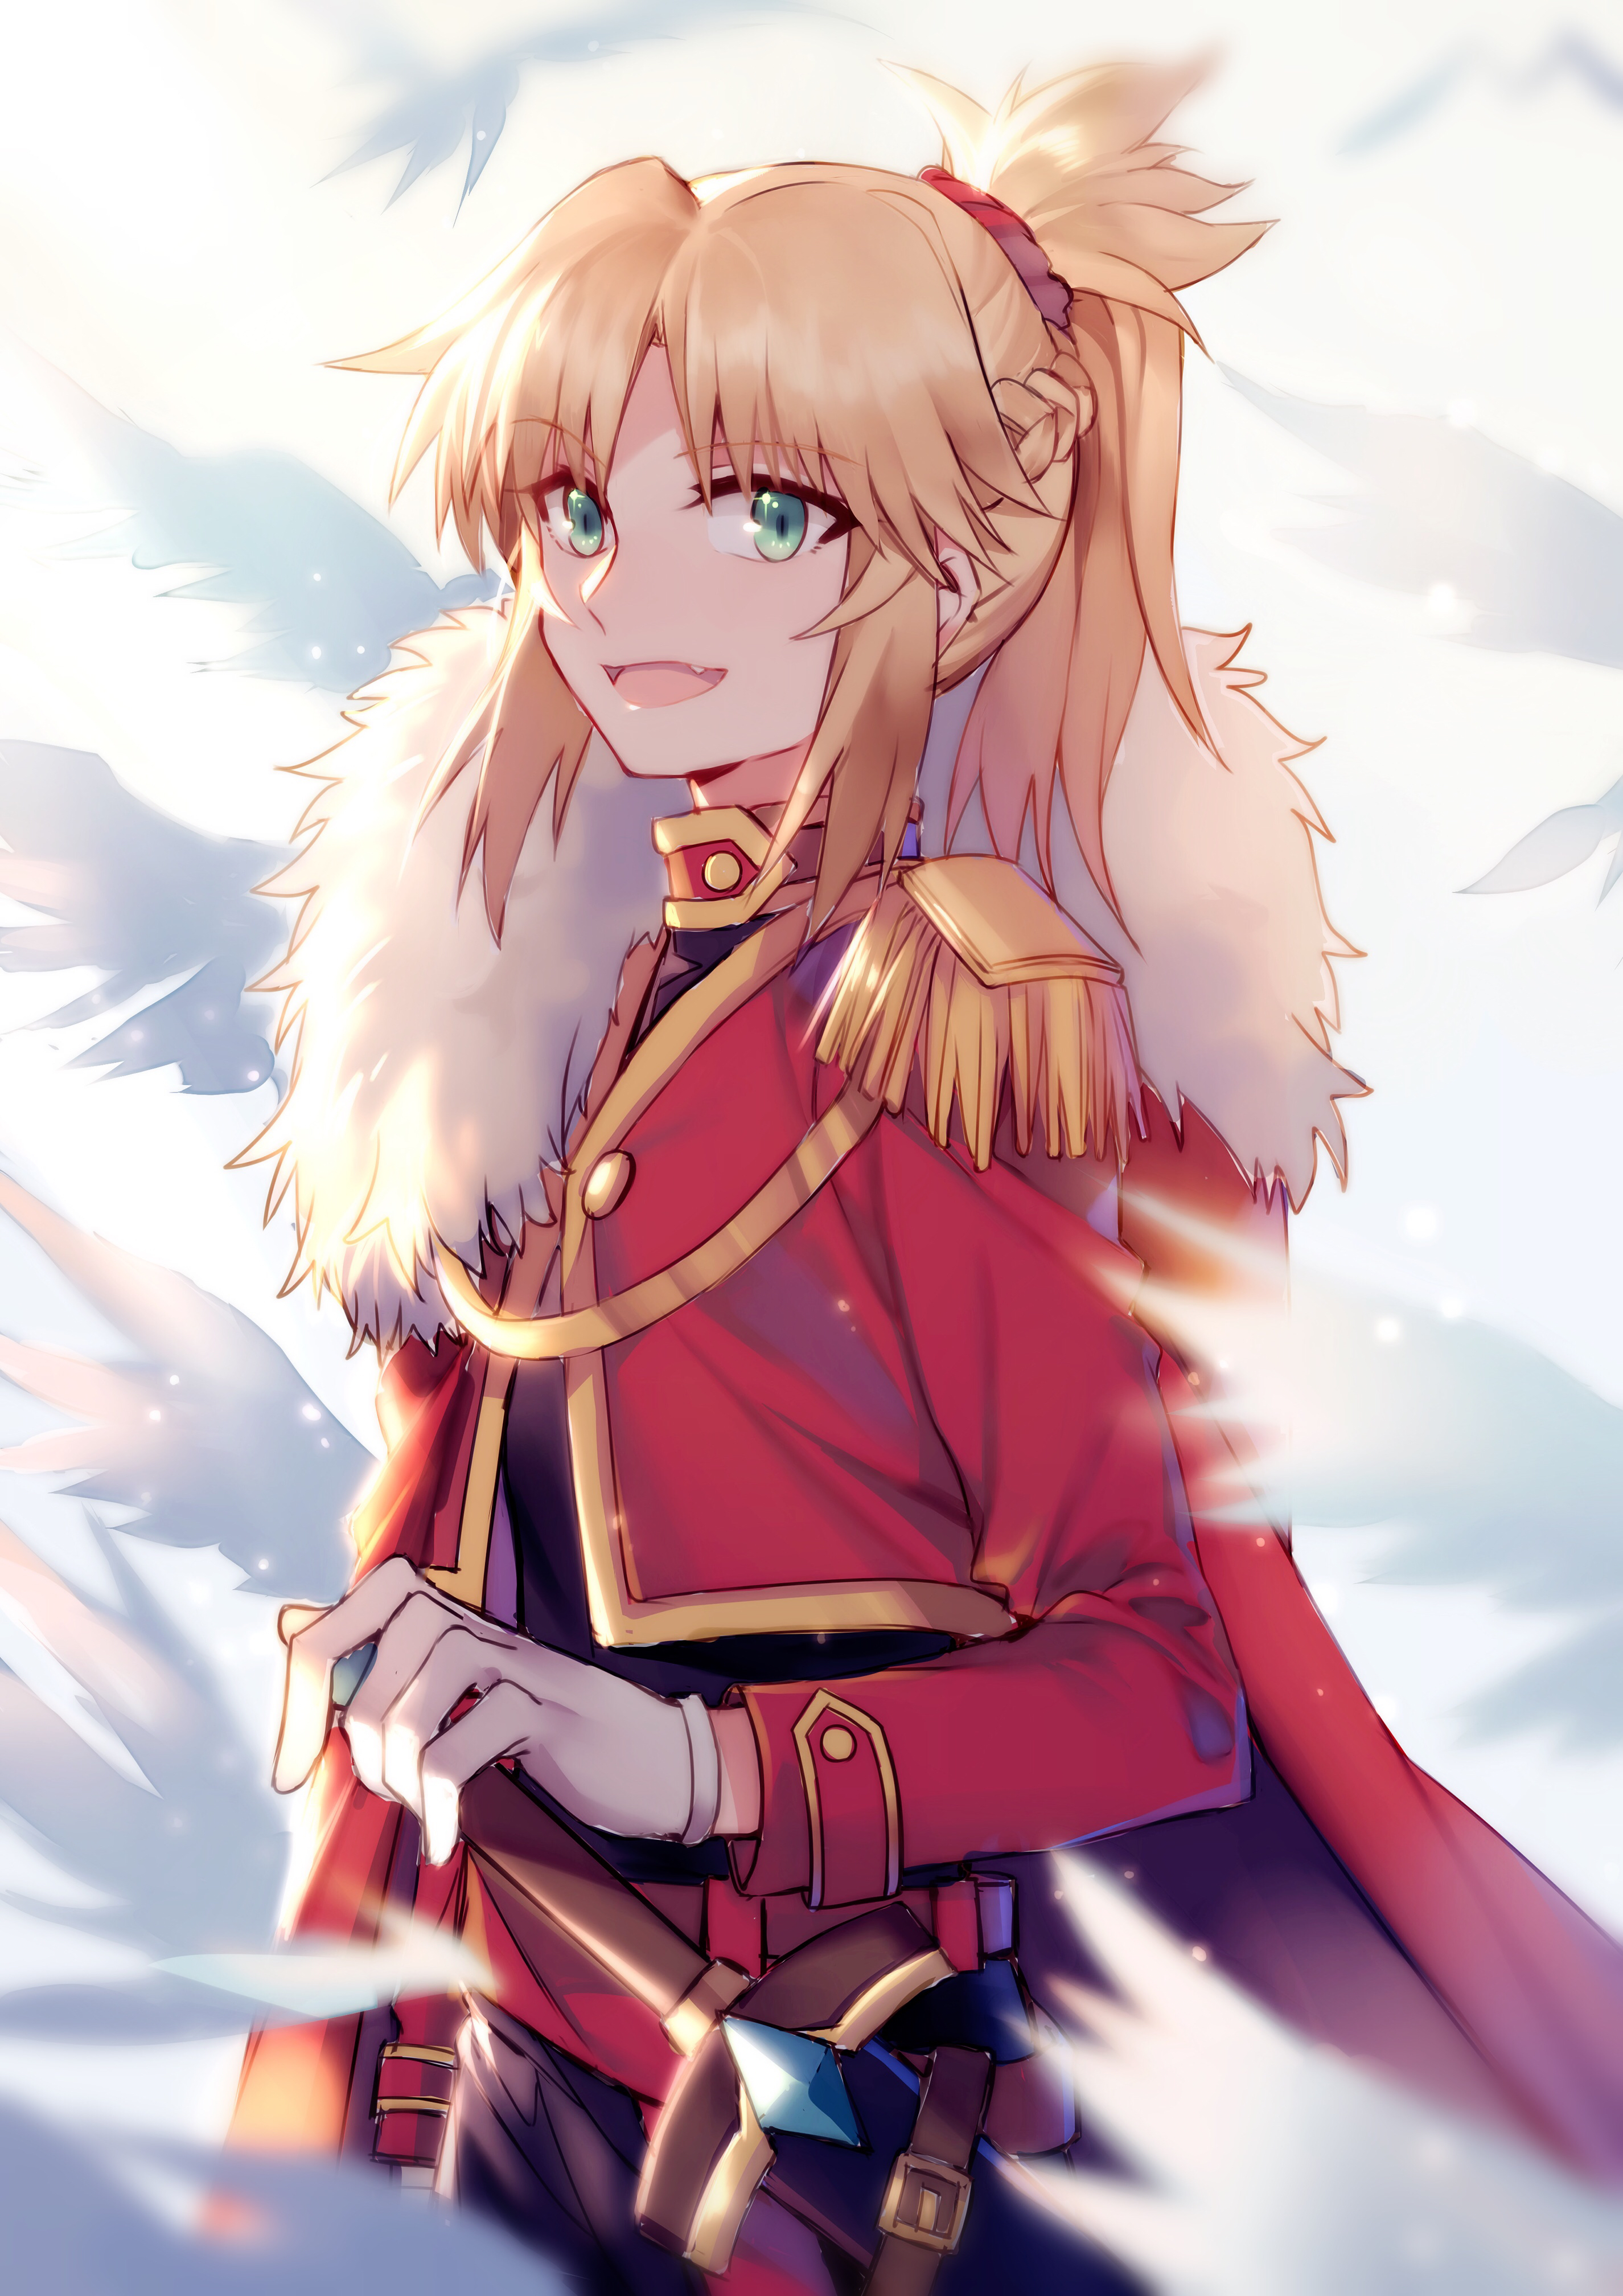 Anime 2851x4032 Fate series Fate/Apocrypha  anime girls green eyes feathers ponytail Mordred (Fate/Apocrypha) smiling fan art digital art 2D small boobs white gloves women with swords female soldier open mouth Fate/Grand Order blonde